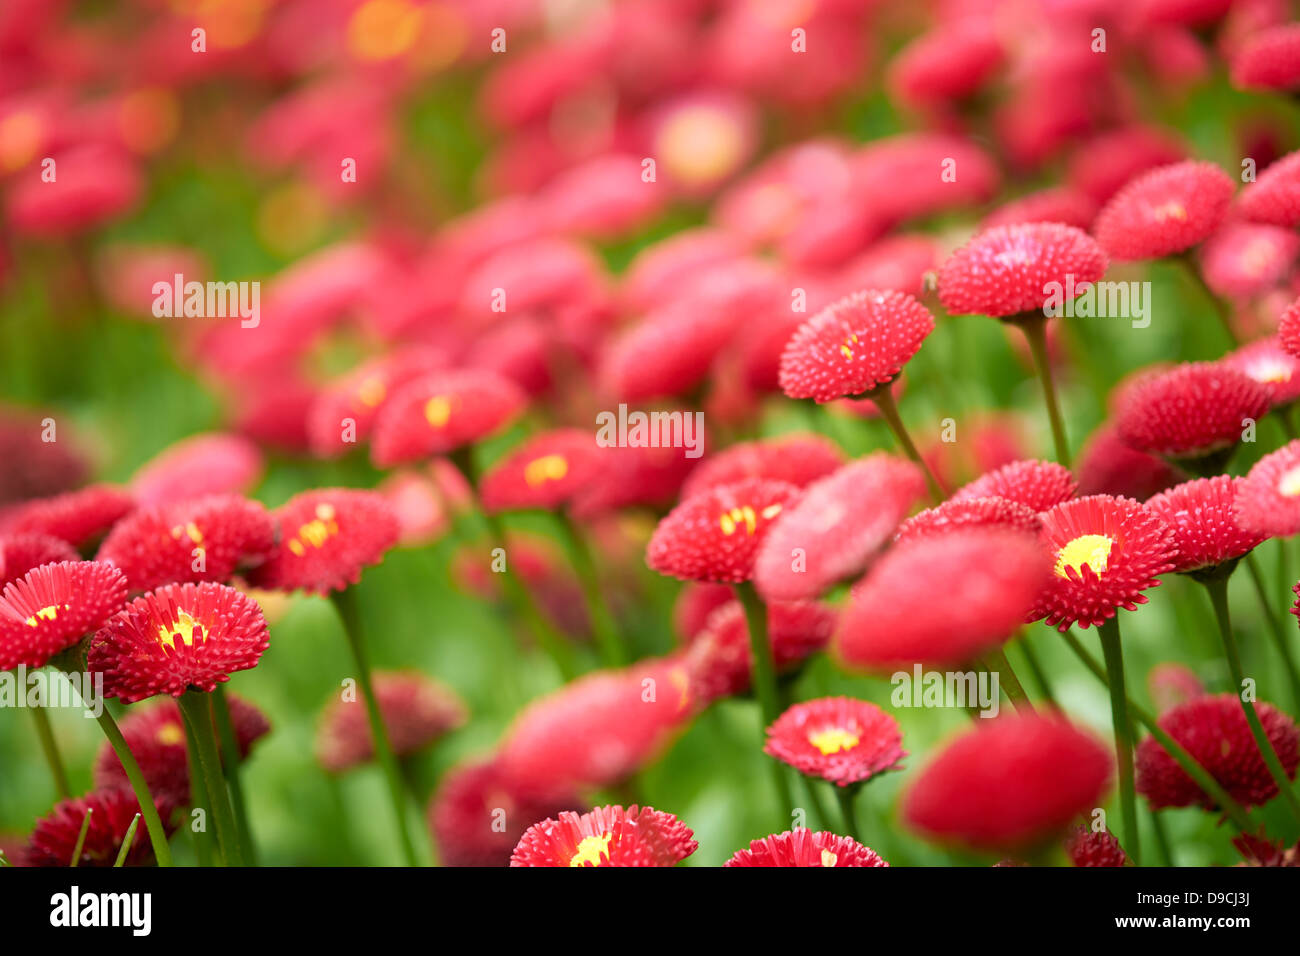 Red flower border with a blurred background Stock Photo